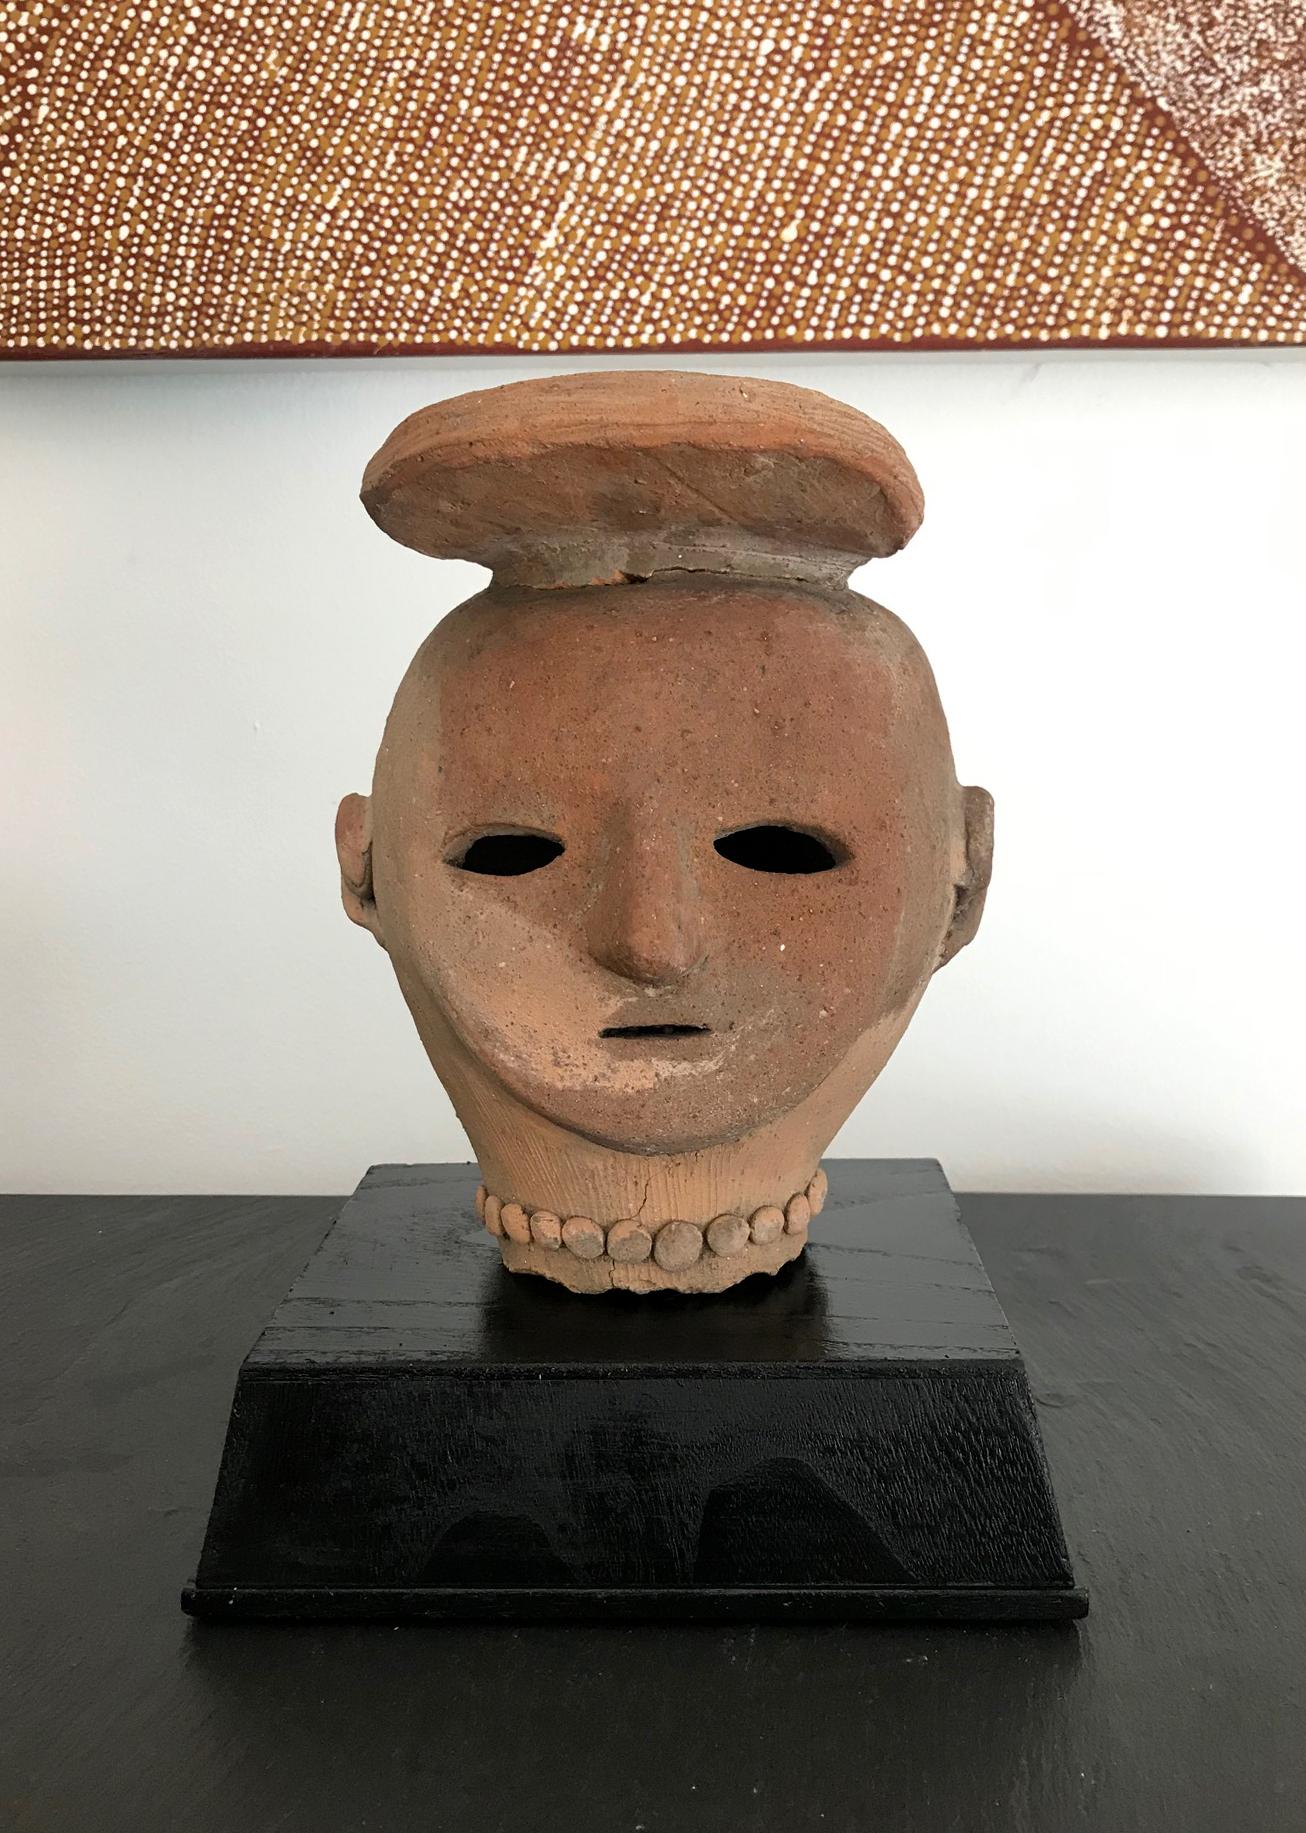 On offer is a rare Haniwa (??) figure head from Kofun Period (3rd to 6th Centuries AD). The Haniwa figures are made from terracotta clay for ritual use and funerary objects, and they created according to the wazumi technique, in which mounds of